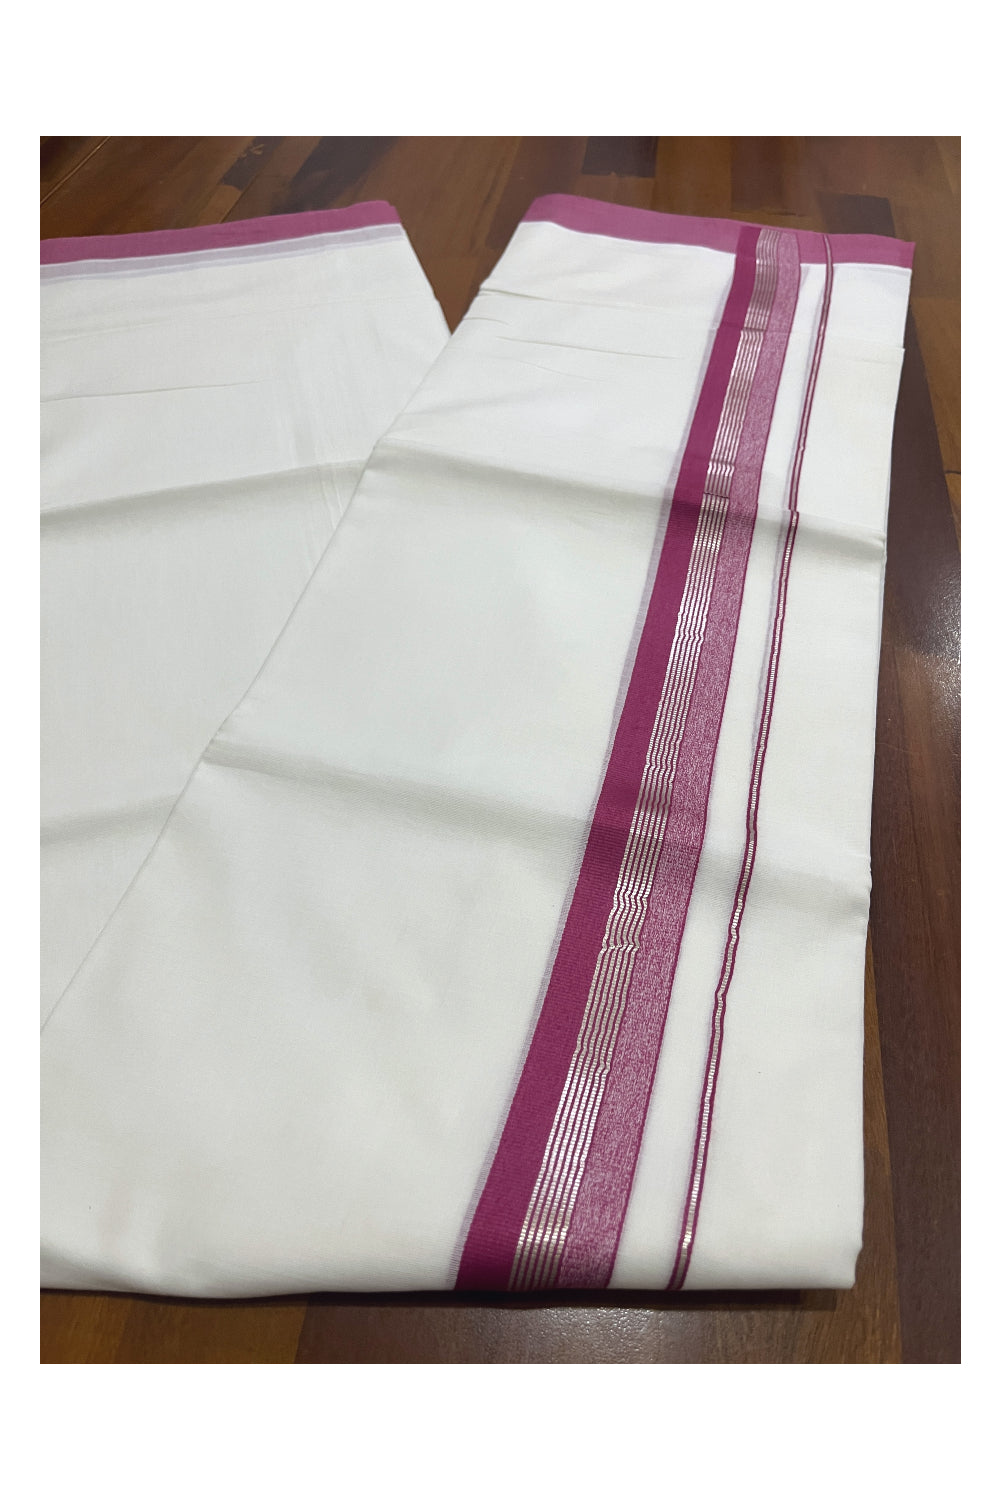 Pure White Cotton Double Mundu with Red and Silver Kasavu Border (South Indian Kerala Dhoti)